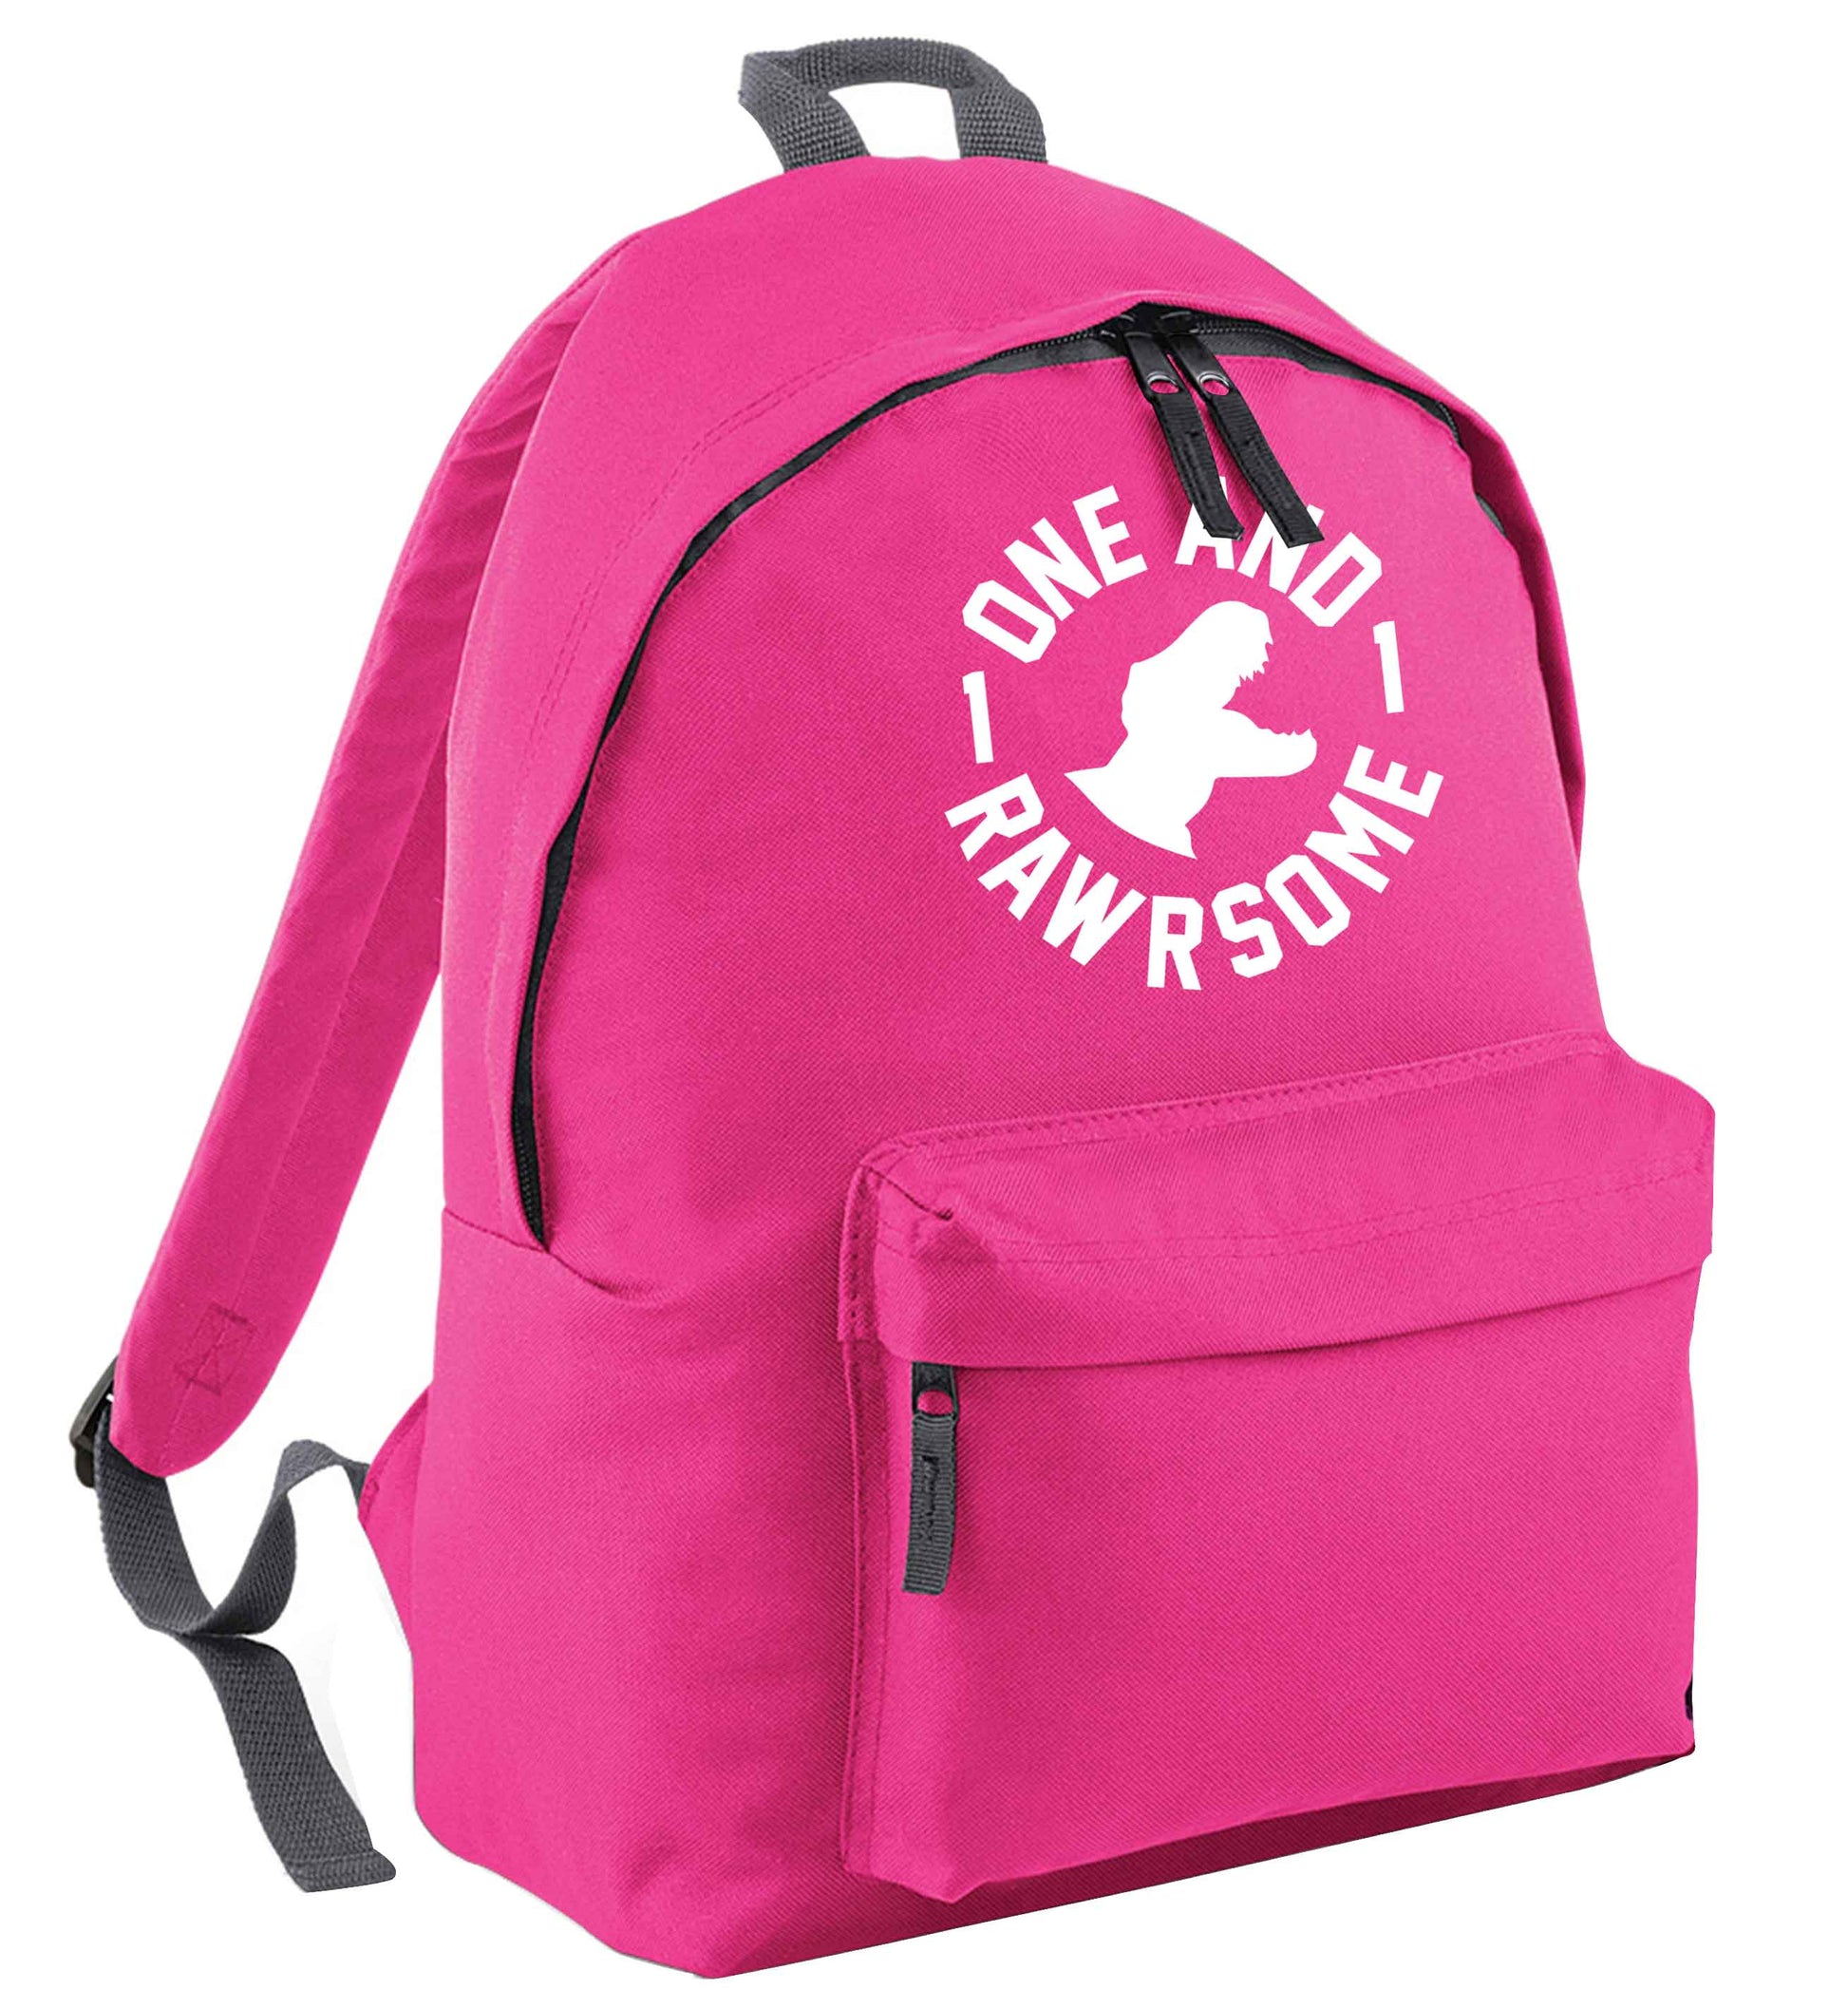 One and Rawrsome pink childrens backpack